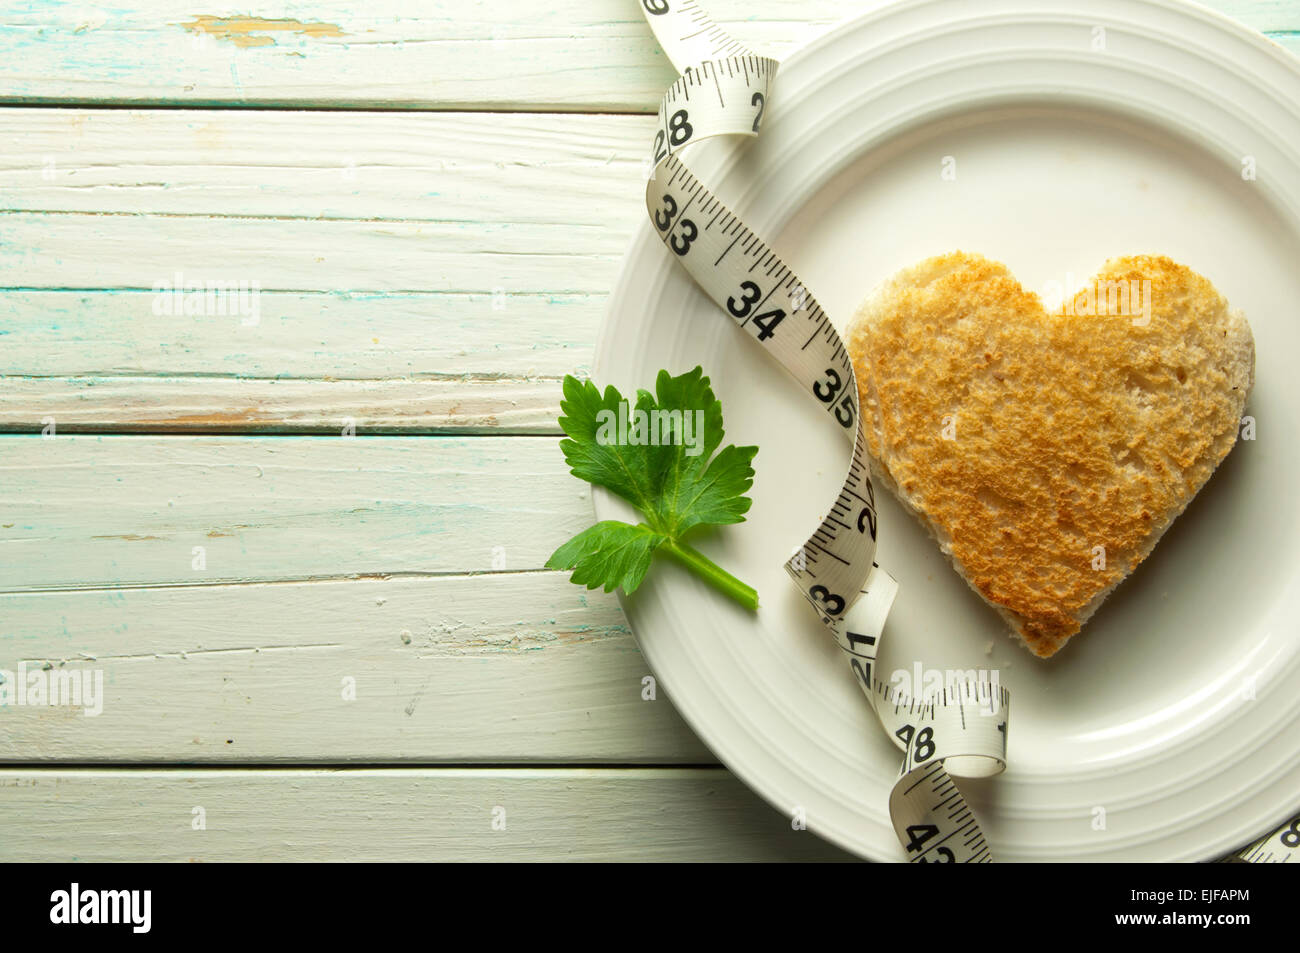 Heart shape toast on a plate with celery leaf and measuring tape Stock Photo